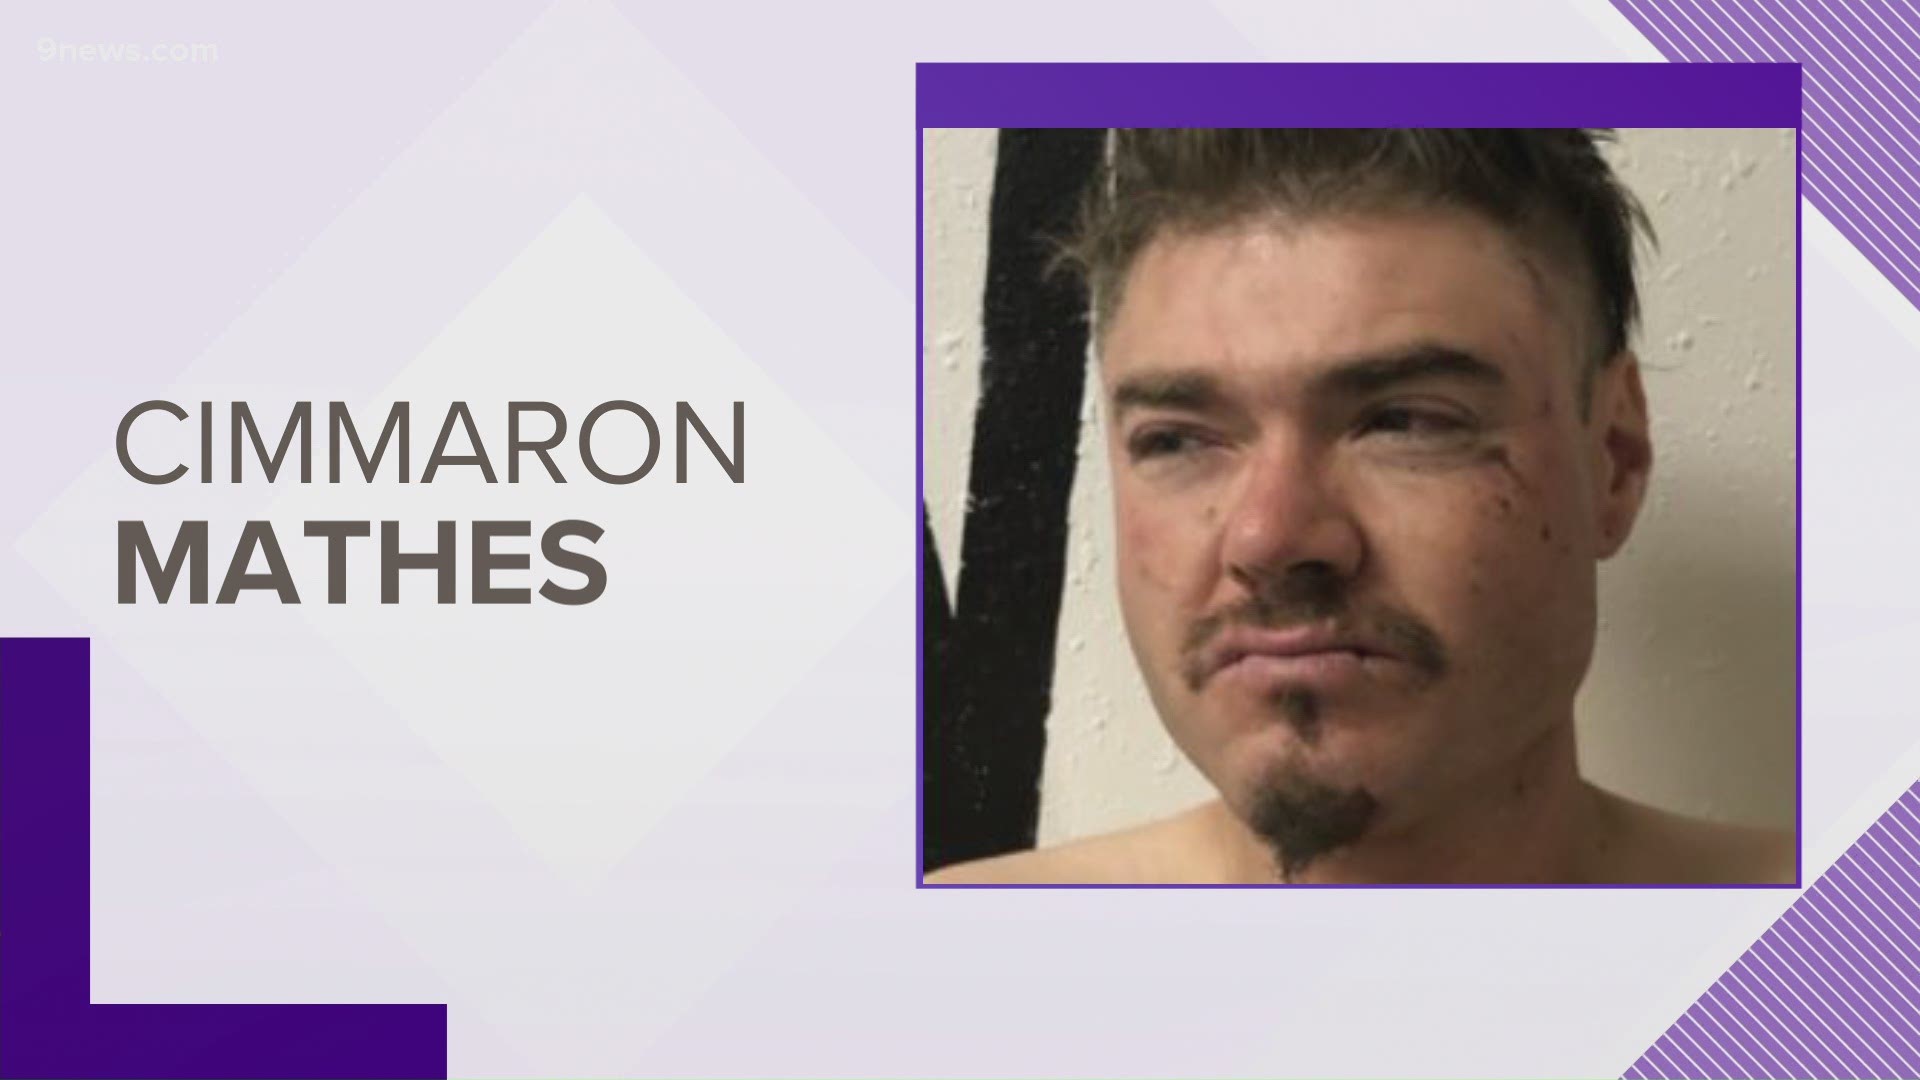 The Costilla County Sheriff's Office said Cimmaron Mathes also set fire to his father's home before SWAT officers took him into custody early Thursday.